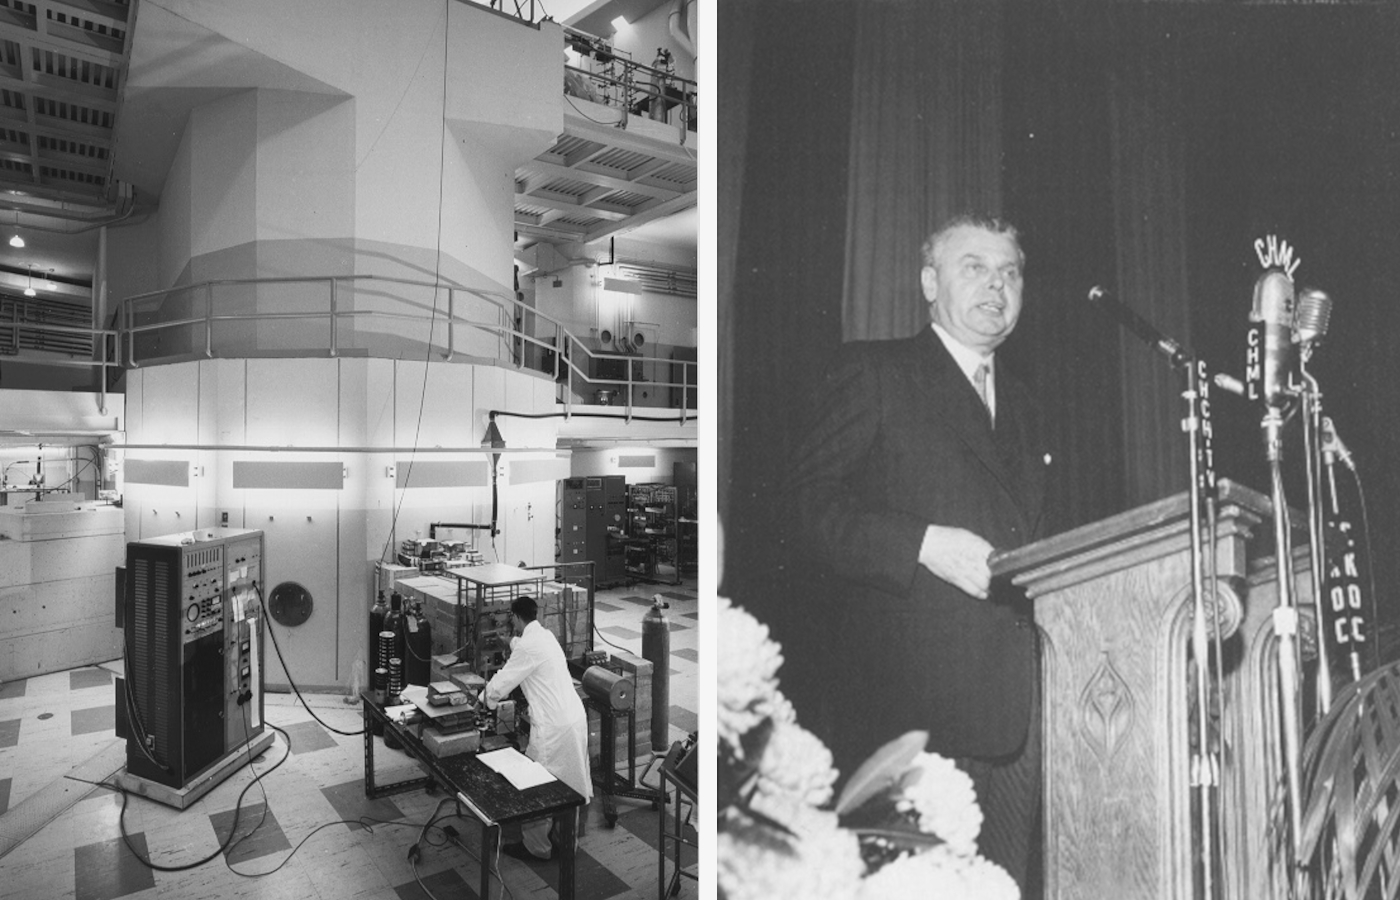 A researcher working inside the reactor in 1959; Prime Minister Diefenbaker speaking at a podium.